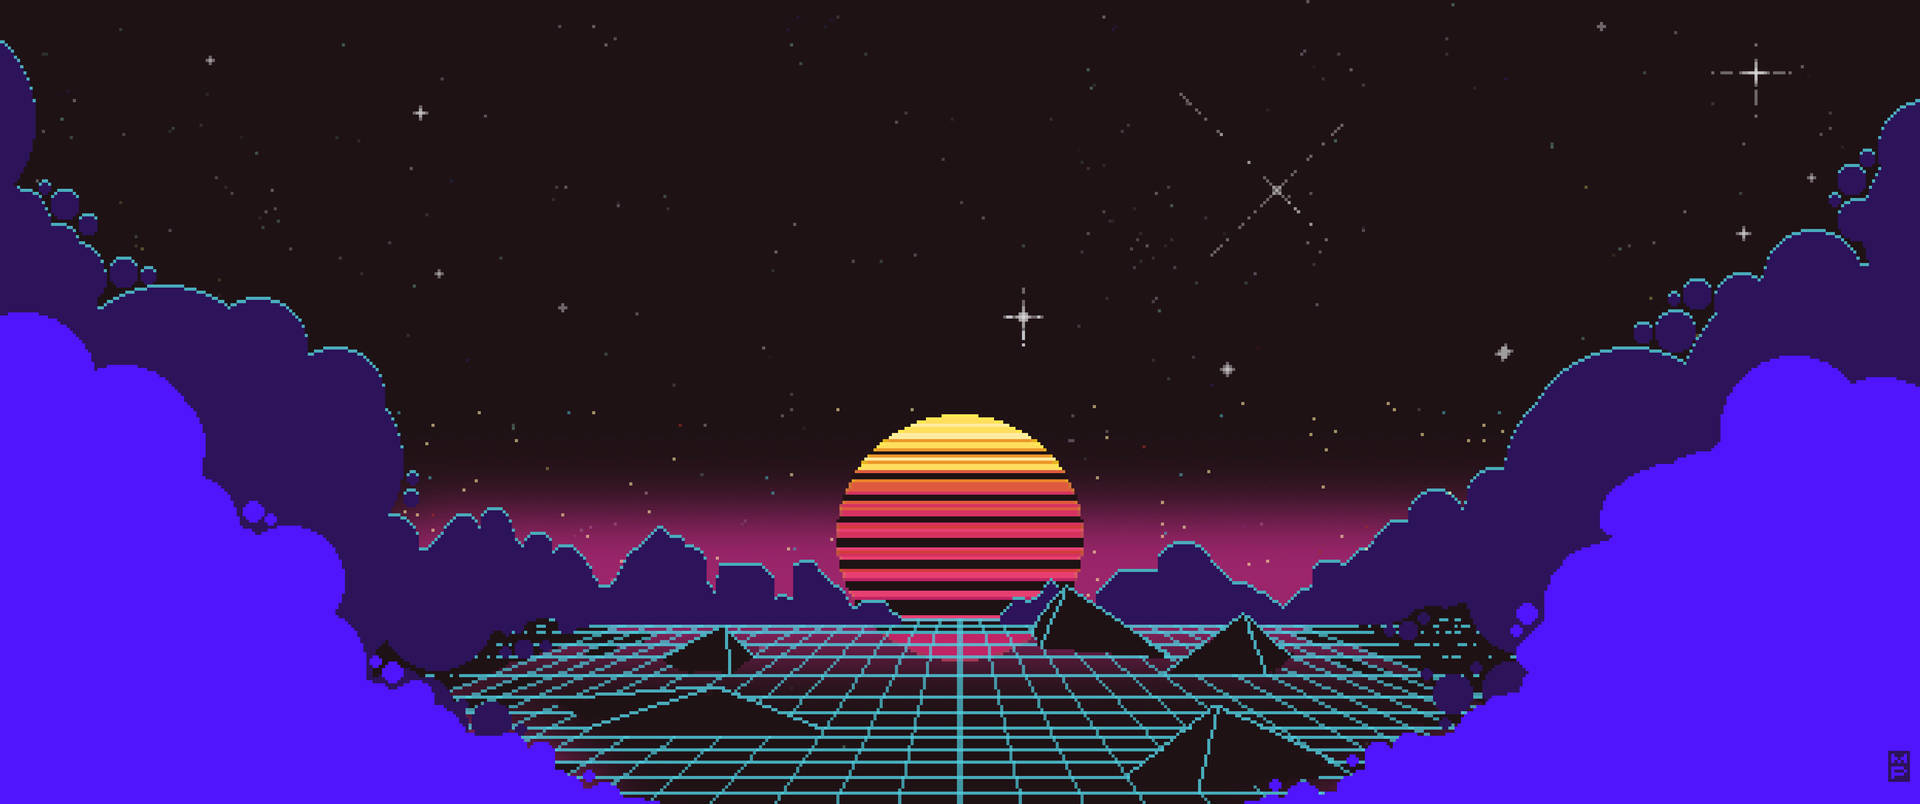 Outrun Video Game Series Fanart Background